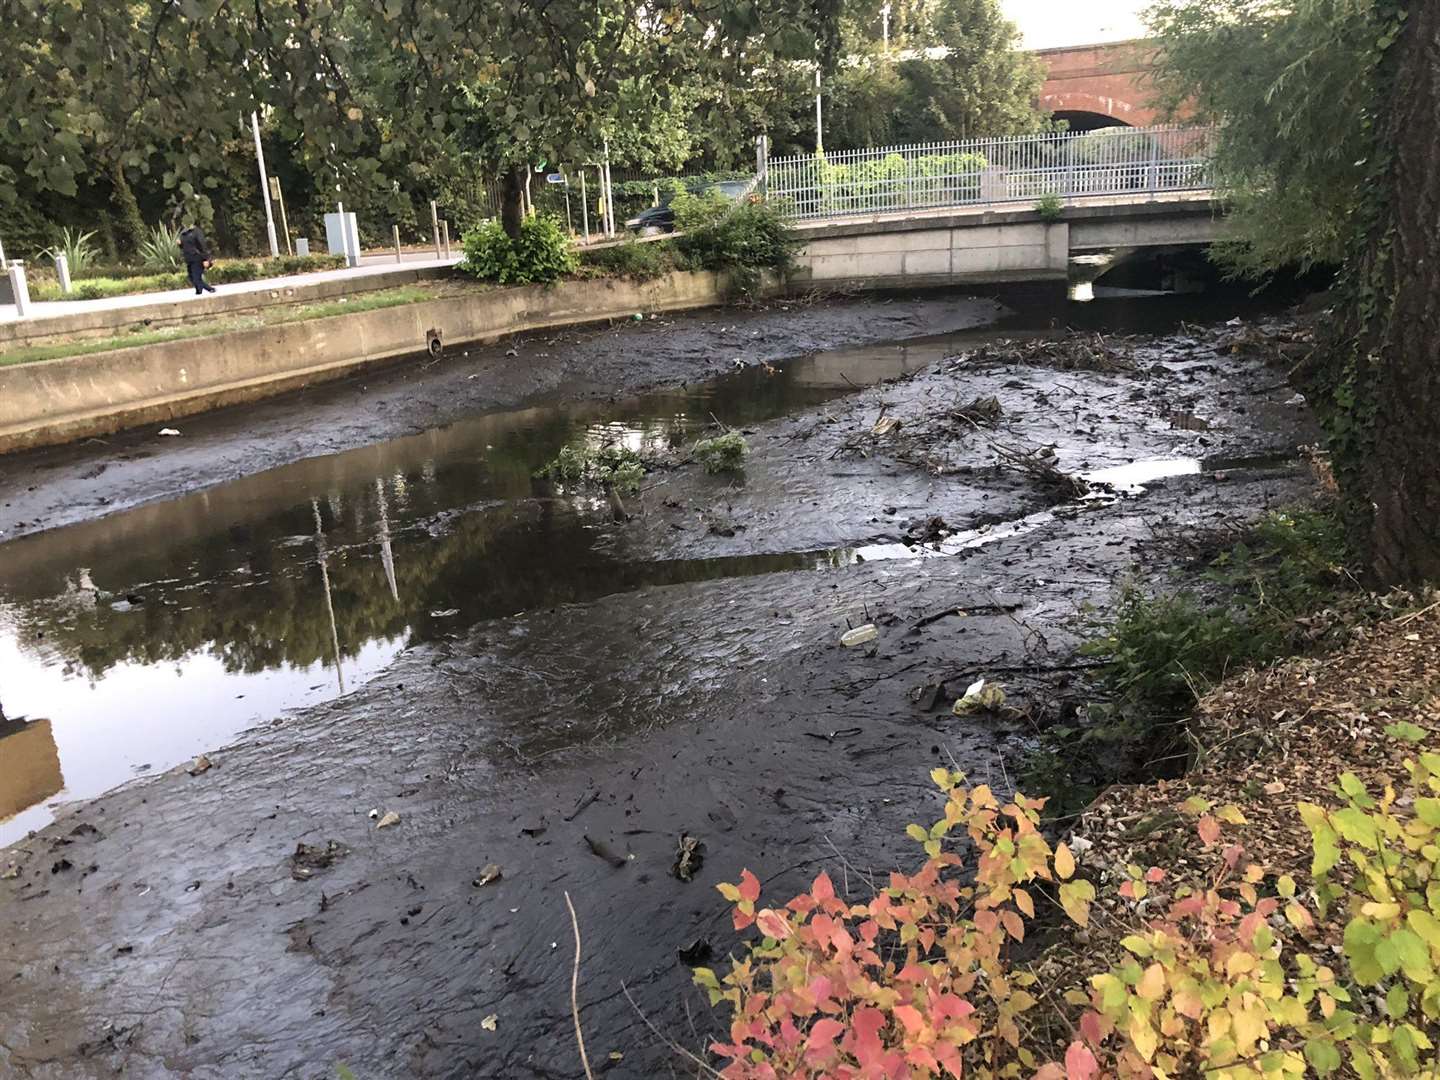 Environmental officers were called out to the River Darent earlier this month following reports of distressed fish and sewage.